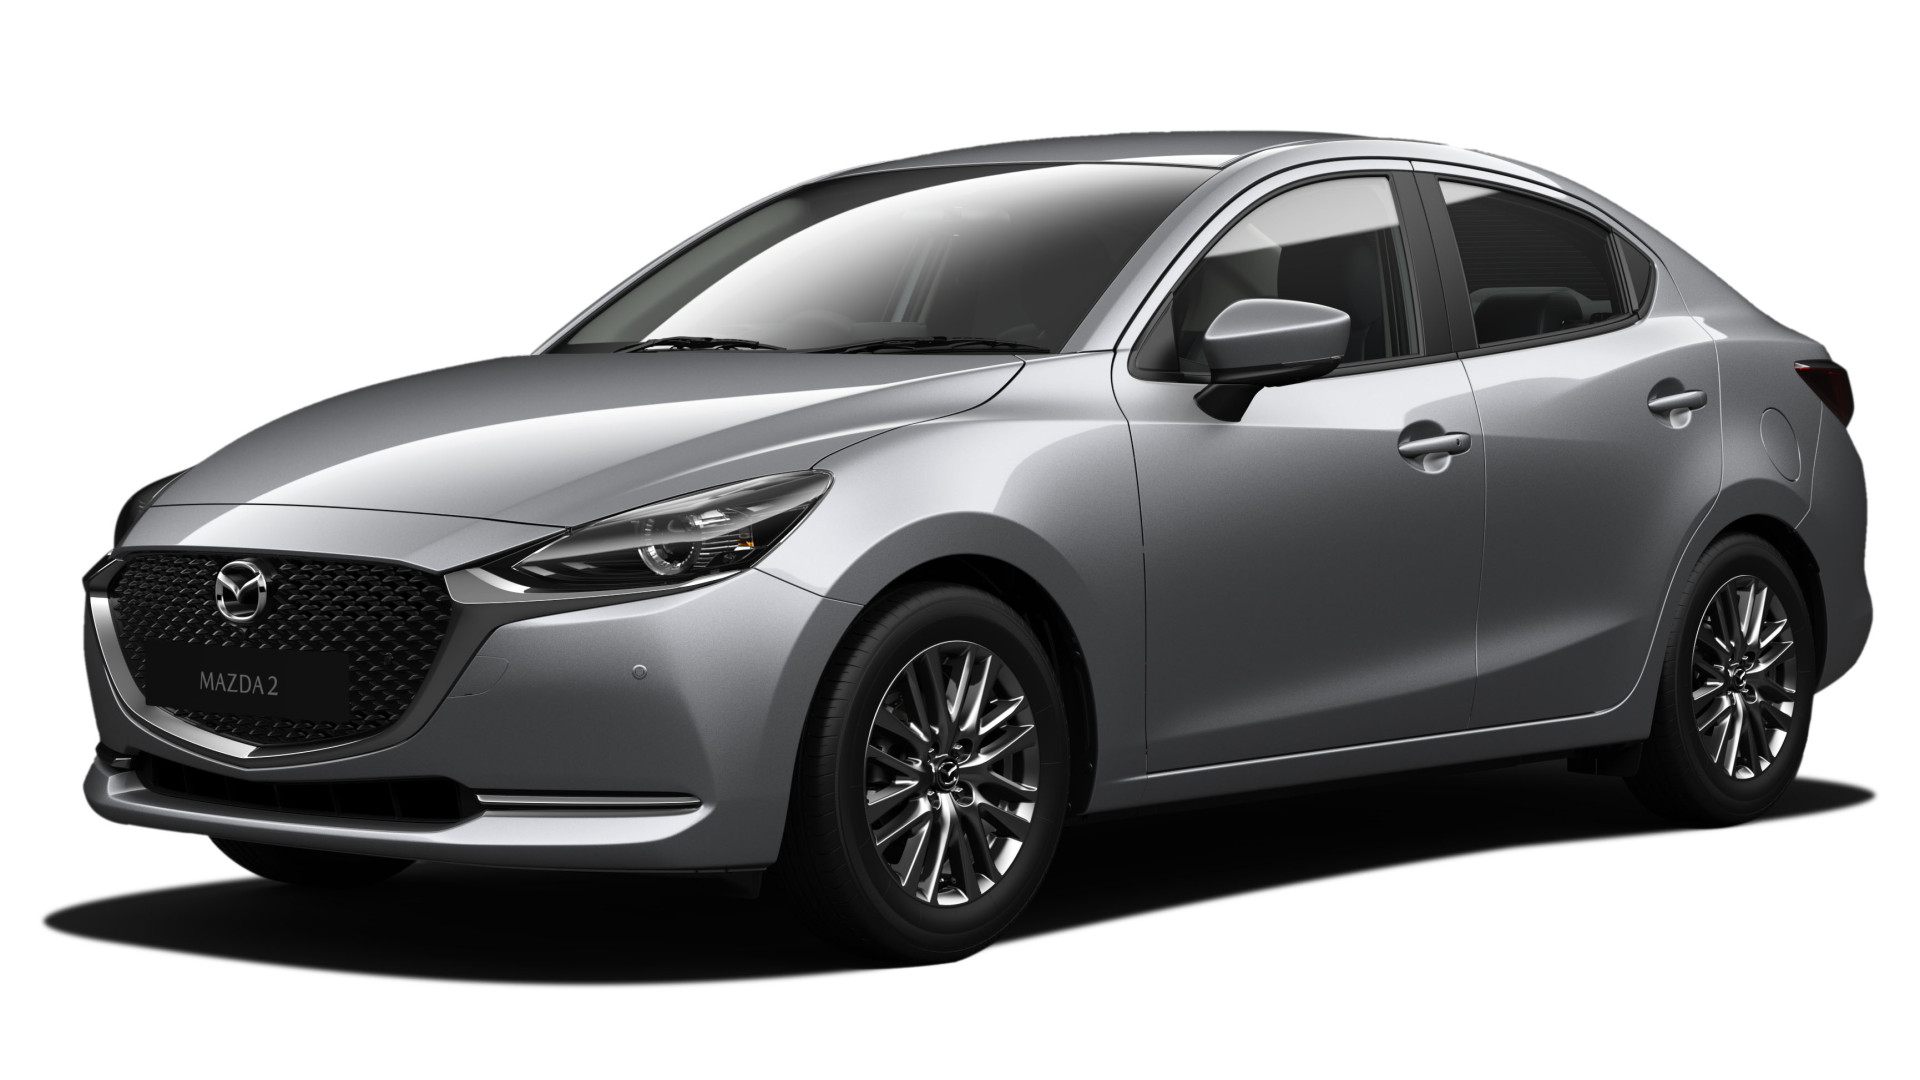 Mazda 2 Mid Spec : 2016 Mazda 2 with LED lights now in M'sia - RM91k